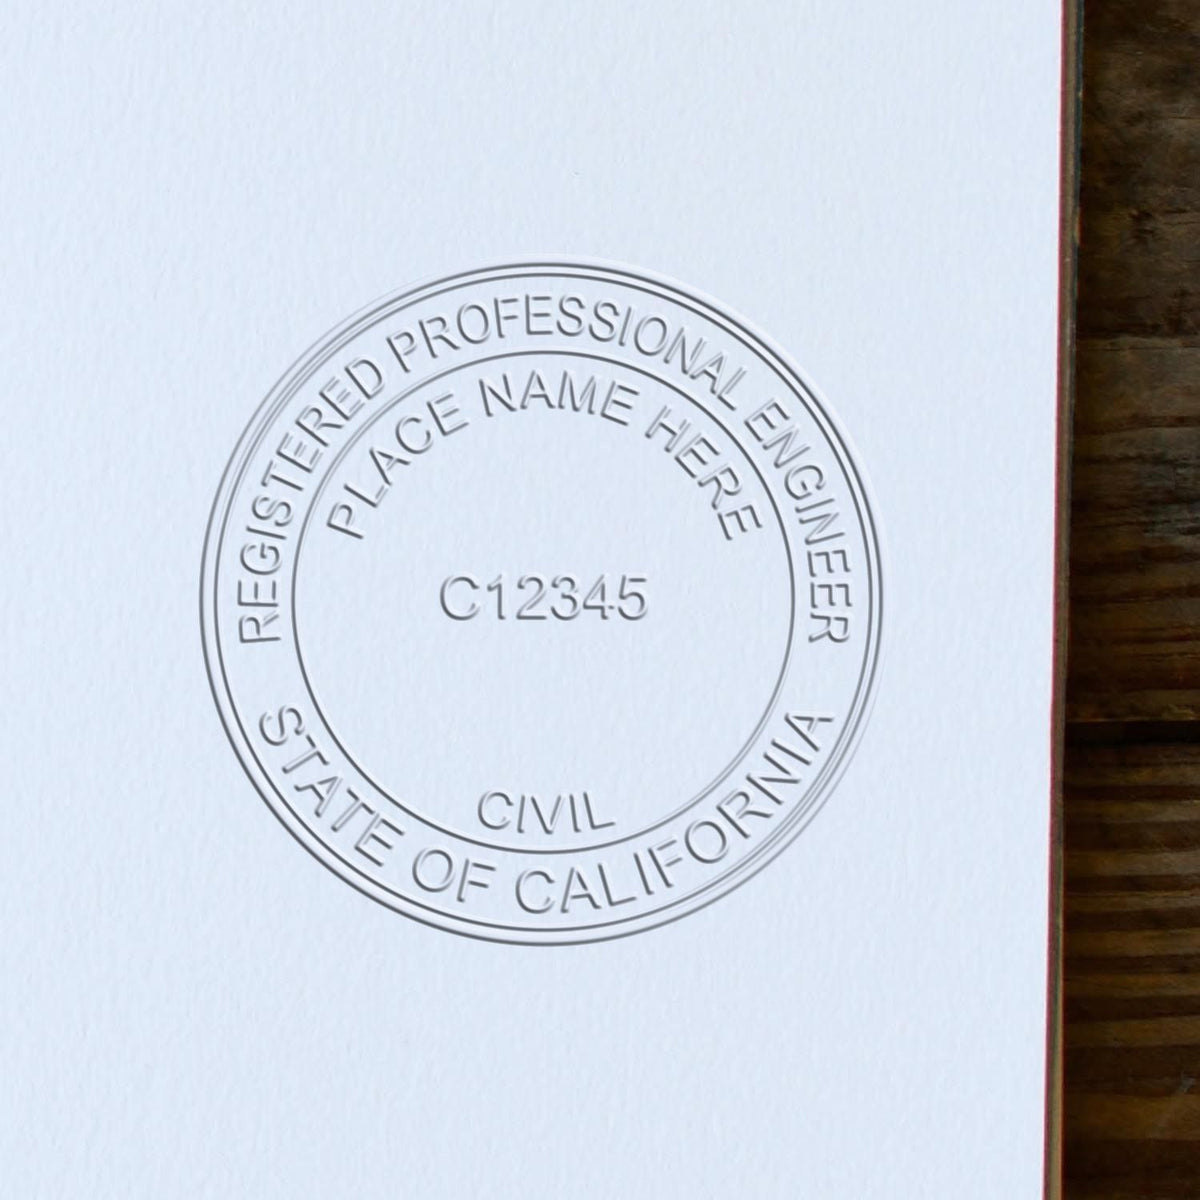 An alternative view of the State of California Extended Long Reach Engineer Seal stamped on a sheet of paper showing the image in use